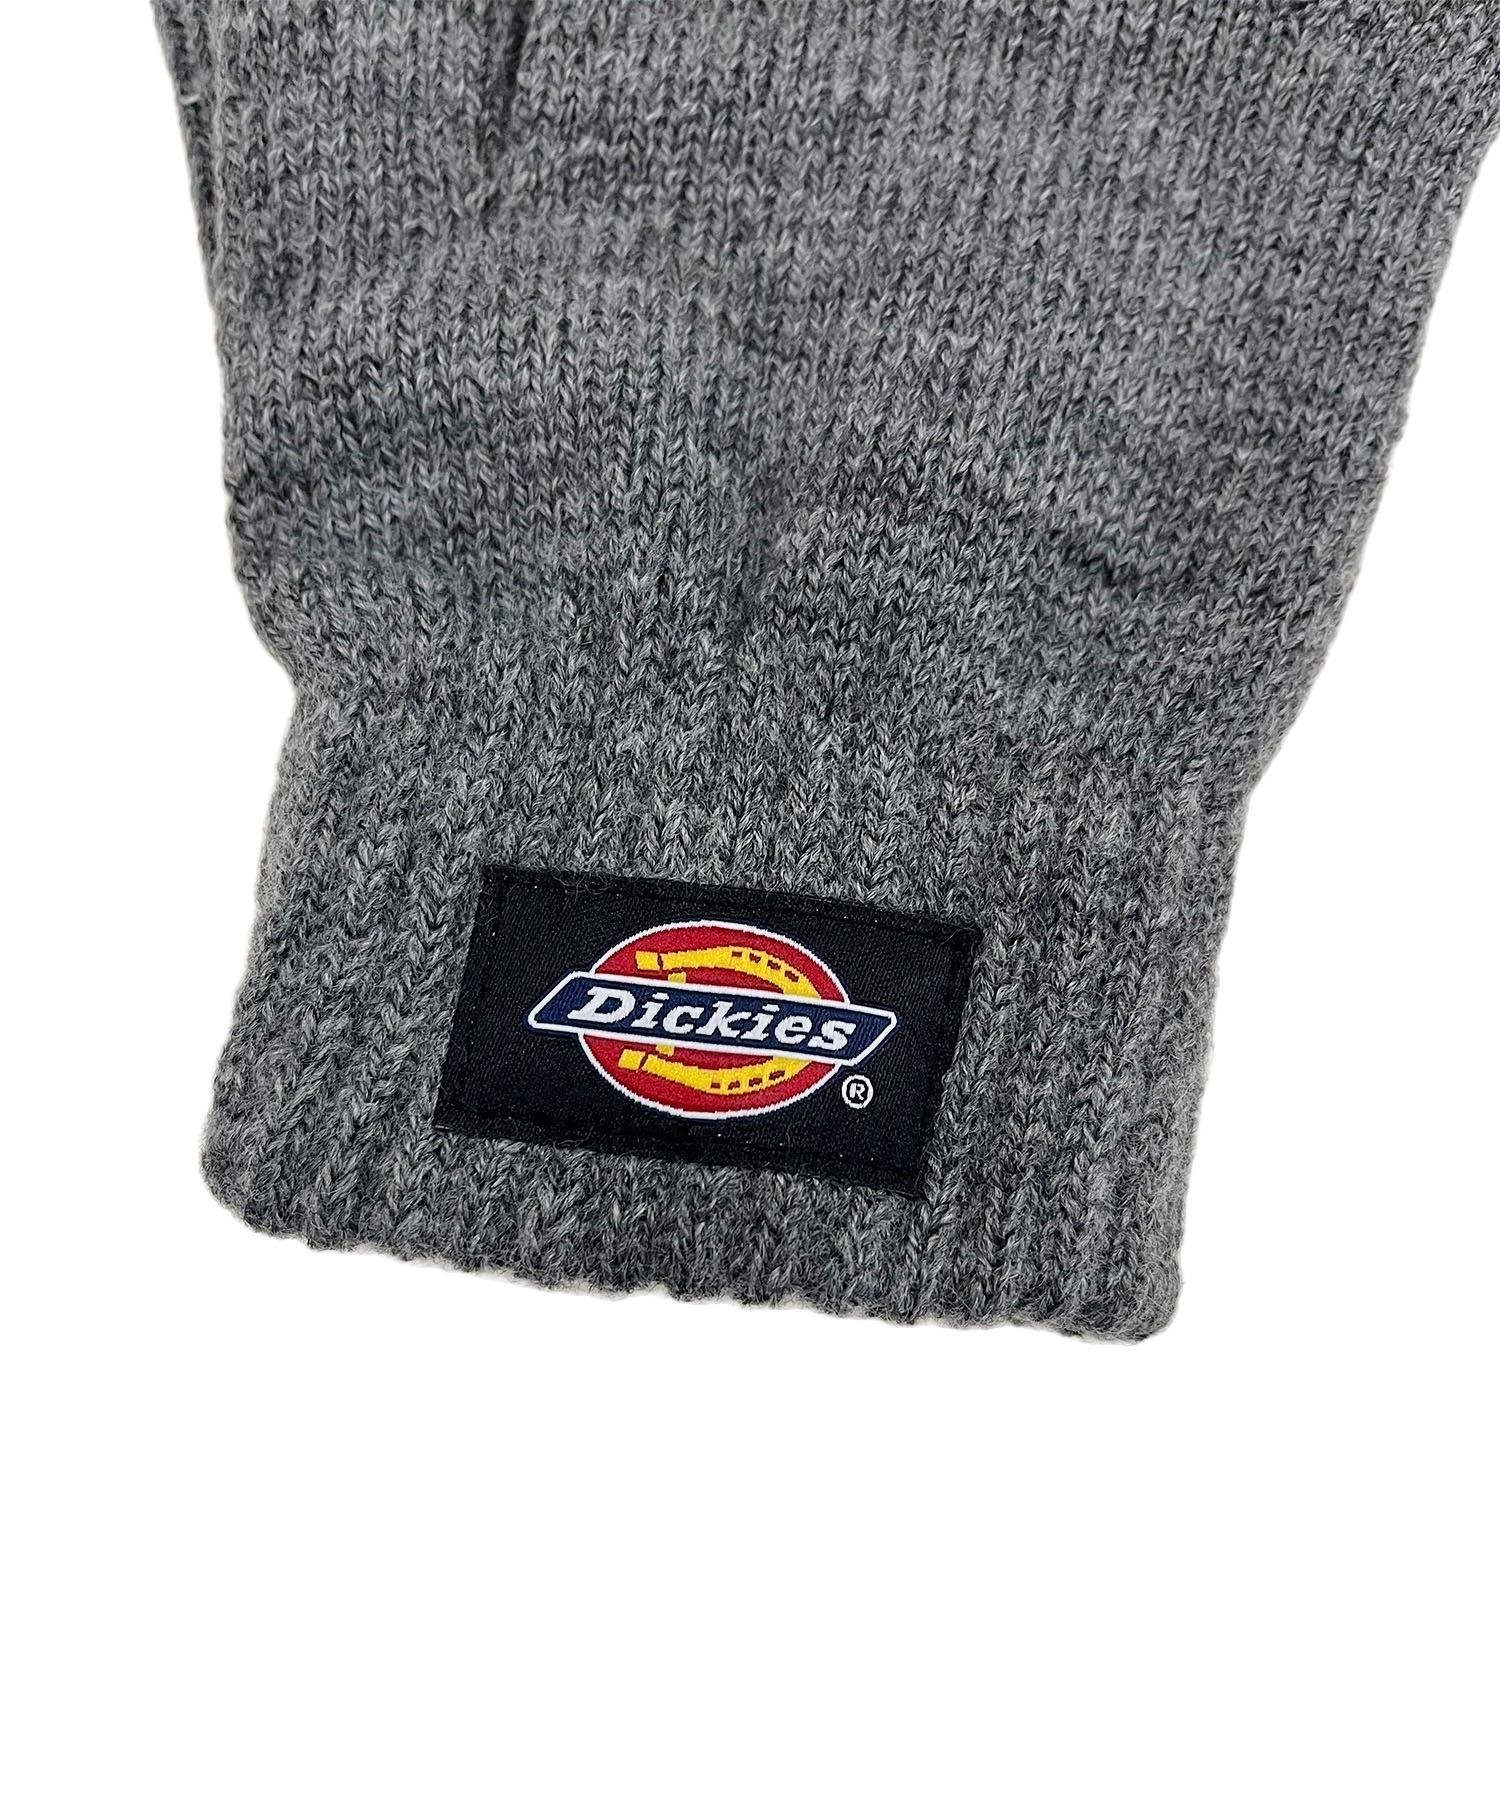 Dickies/ディッキーズ DK MS KNIT GLOBE Kids キッズ 手袋 80130000 ムラサキスポーツ別注(85GY-FREE)